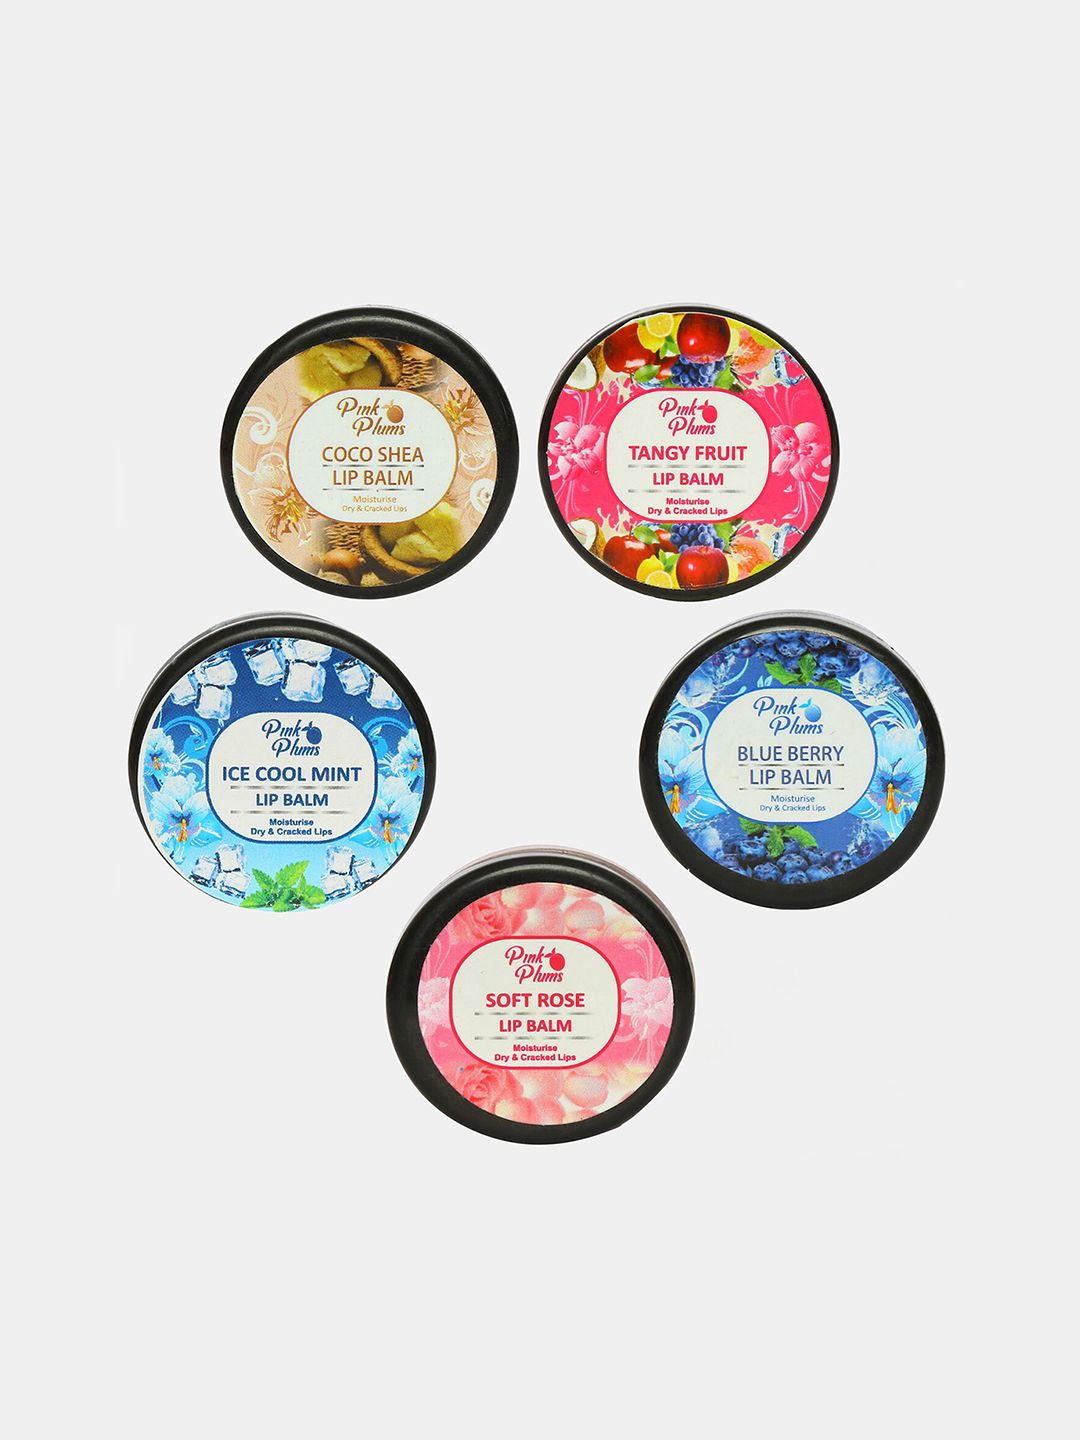 Pink Plums Set of 5 Lip Balm - Coco Shea-Tangy Fruit-Ice Cool Mint-Blue Berry & Soft Rose Price in India